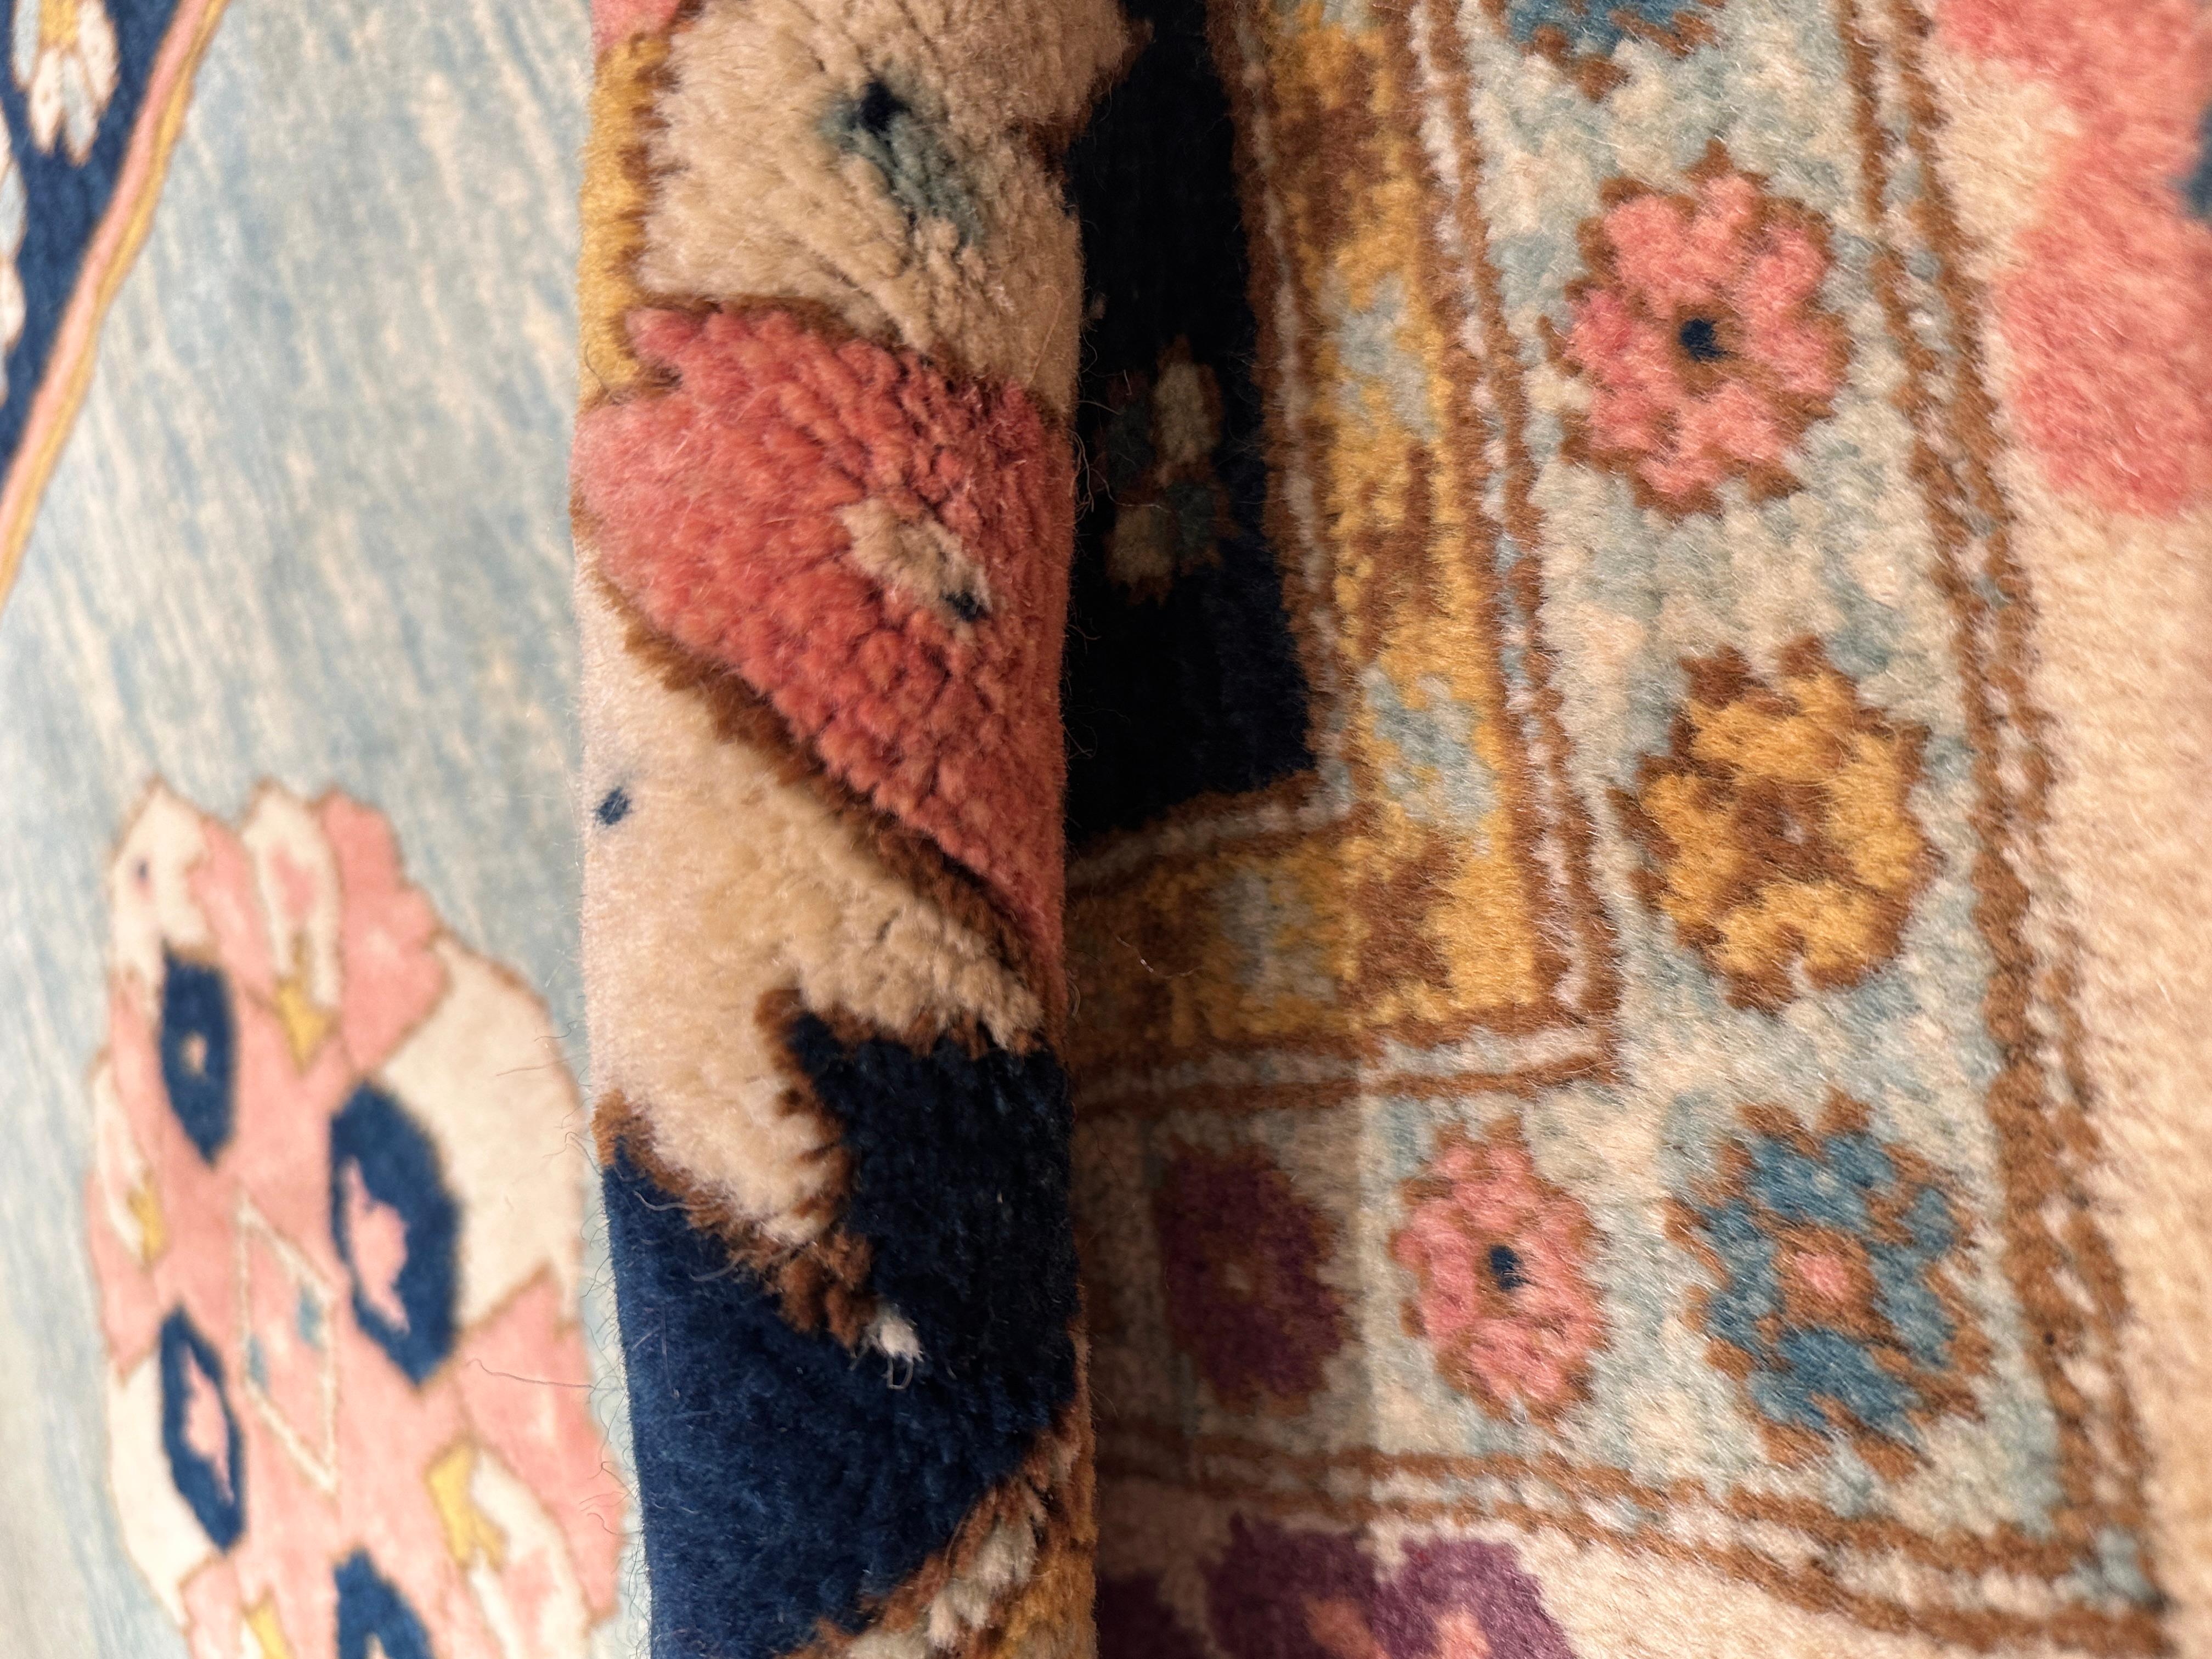 The source of the rug comes from the book Orient Star – A Carpet Collection, E. Heinrich Kirchheim, Hali Publications Ltd, 1993 nr.166. This is similar to Transylvanian carpets designed by 18th century rugs from West Turkey. This rug has blue corner